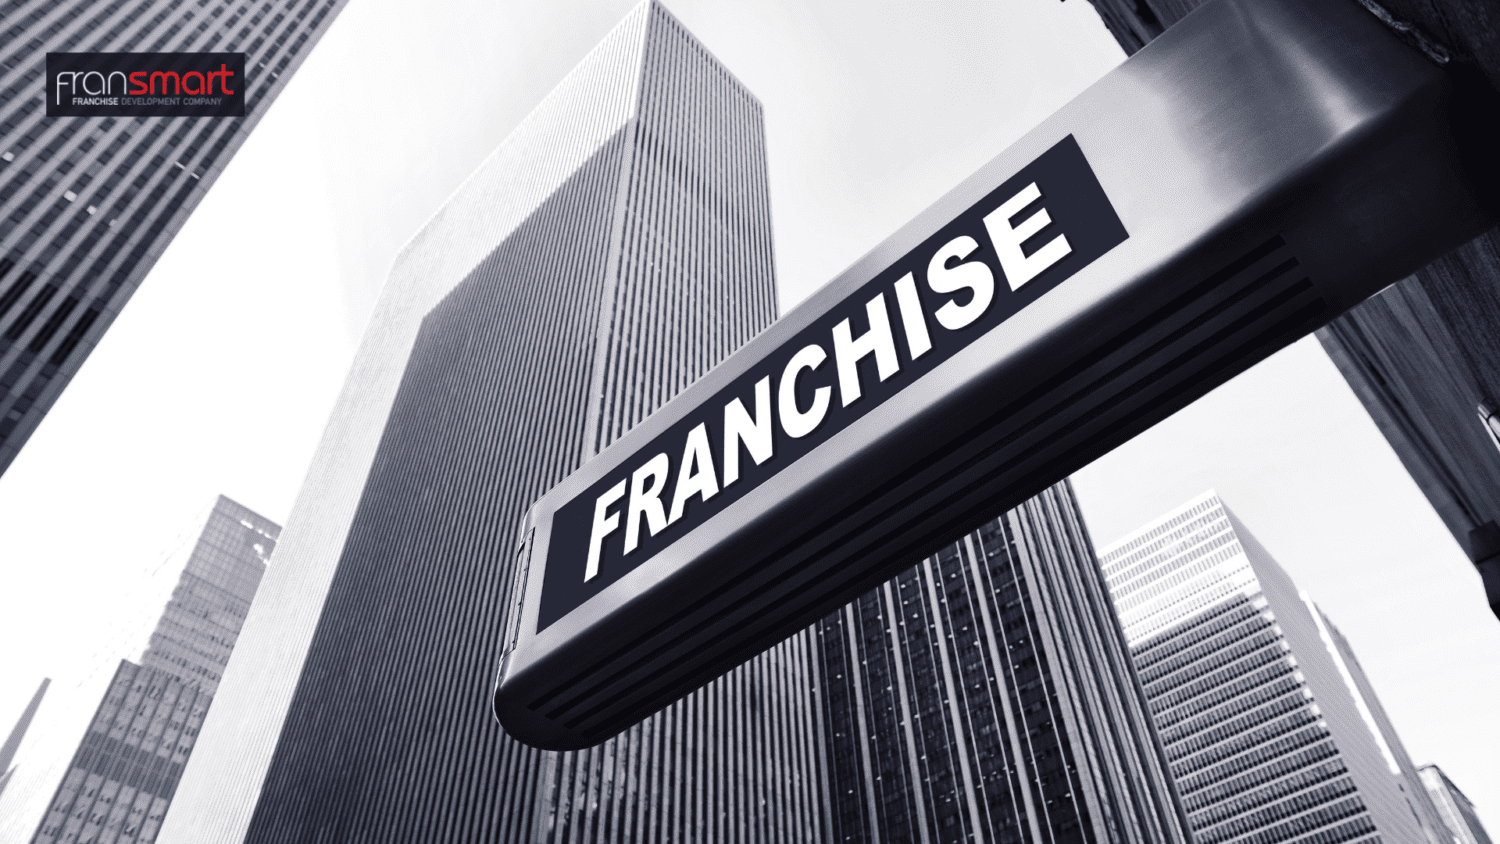 How To Own A Franchise